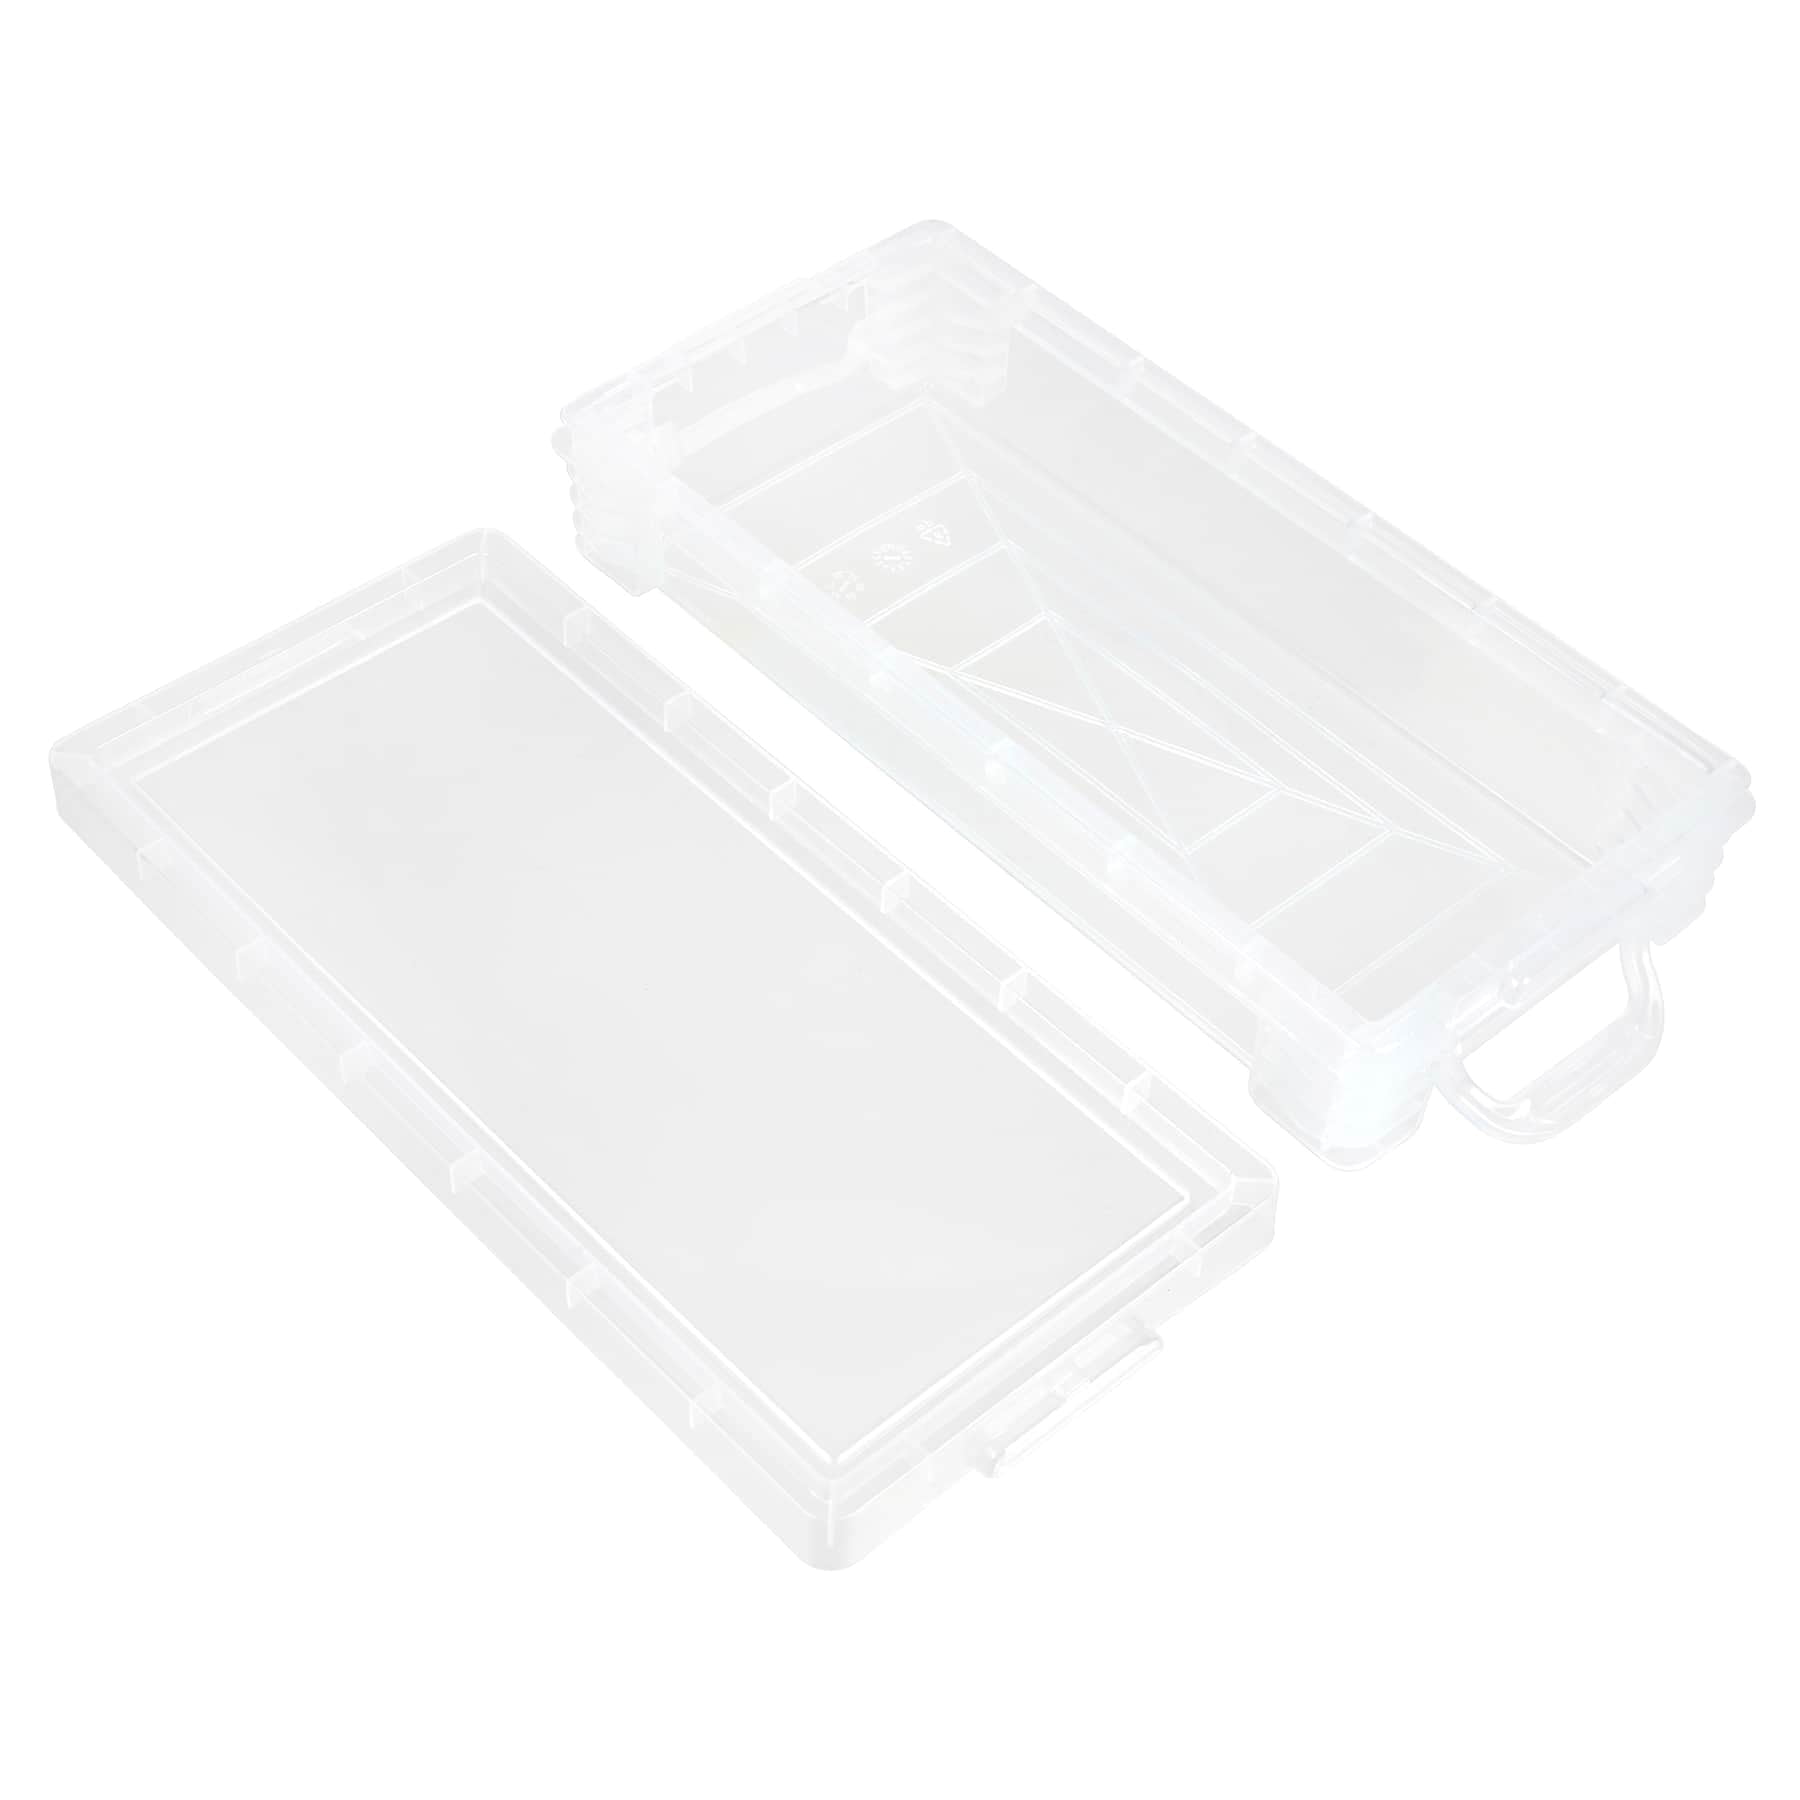 Clear Soft Folding Boxes - Holds 12 pencils (25 pieces) - [FPB340]